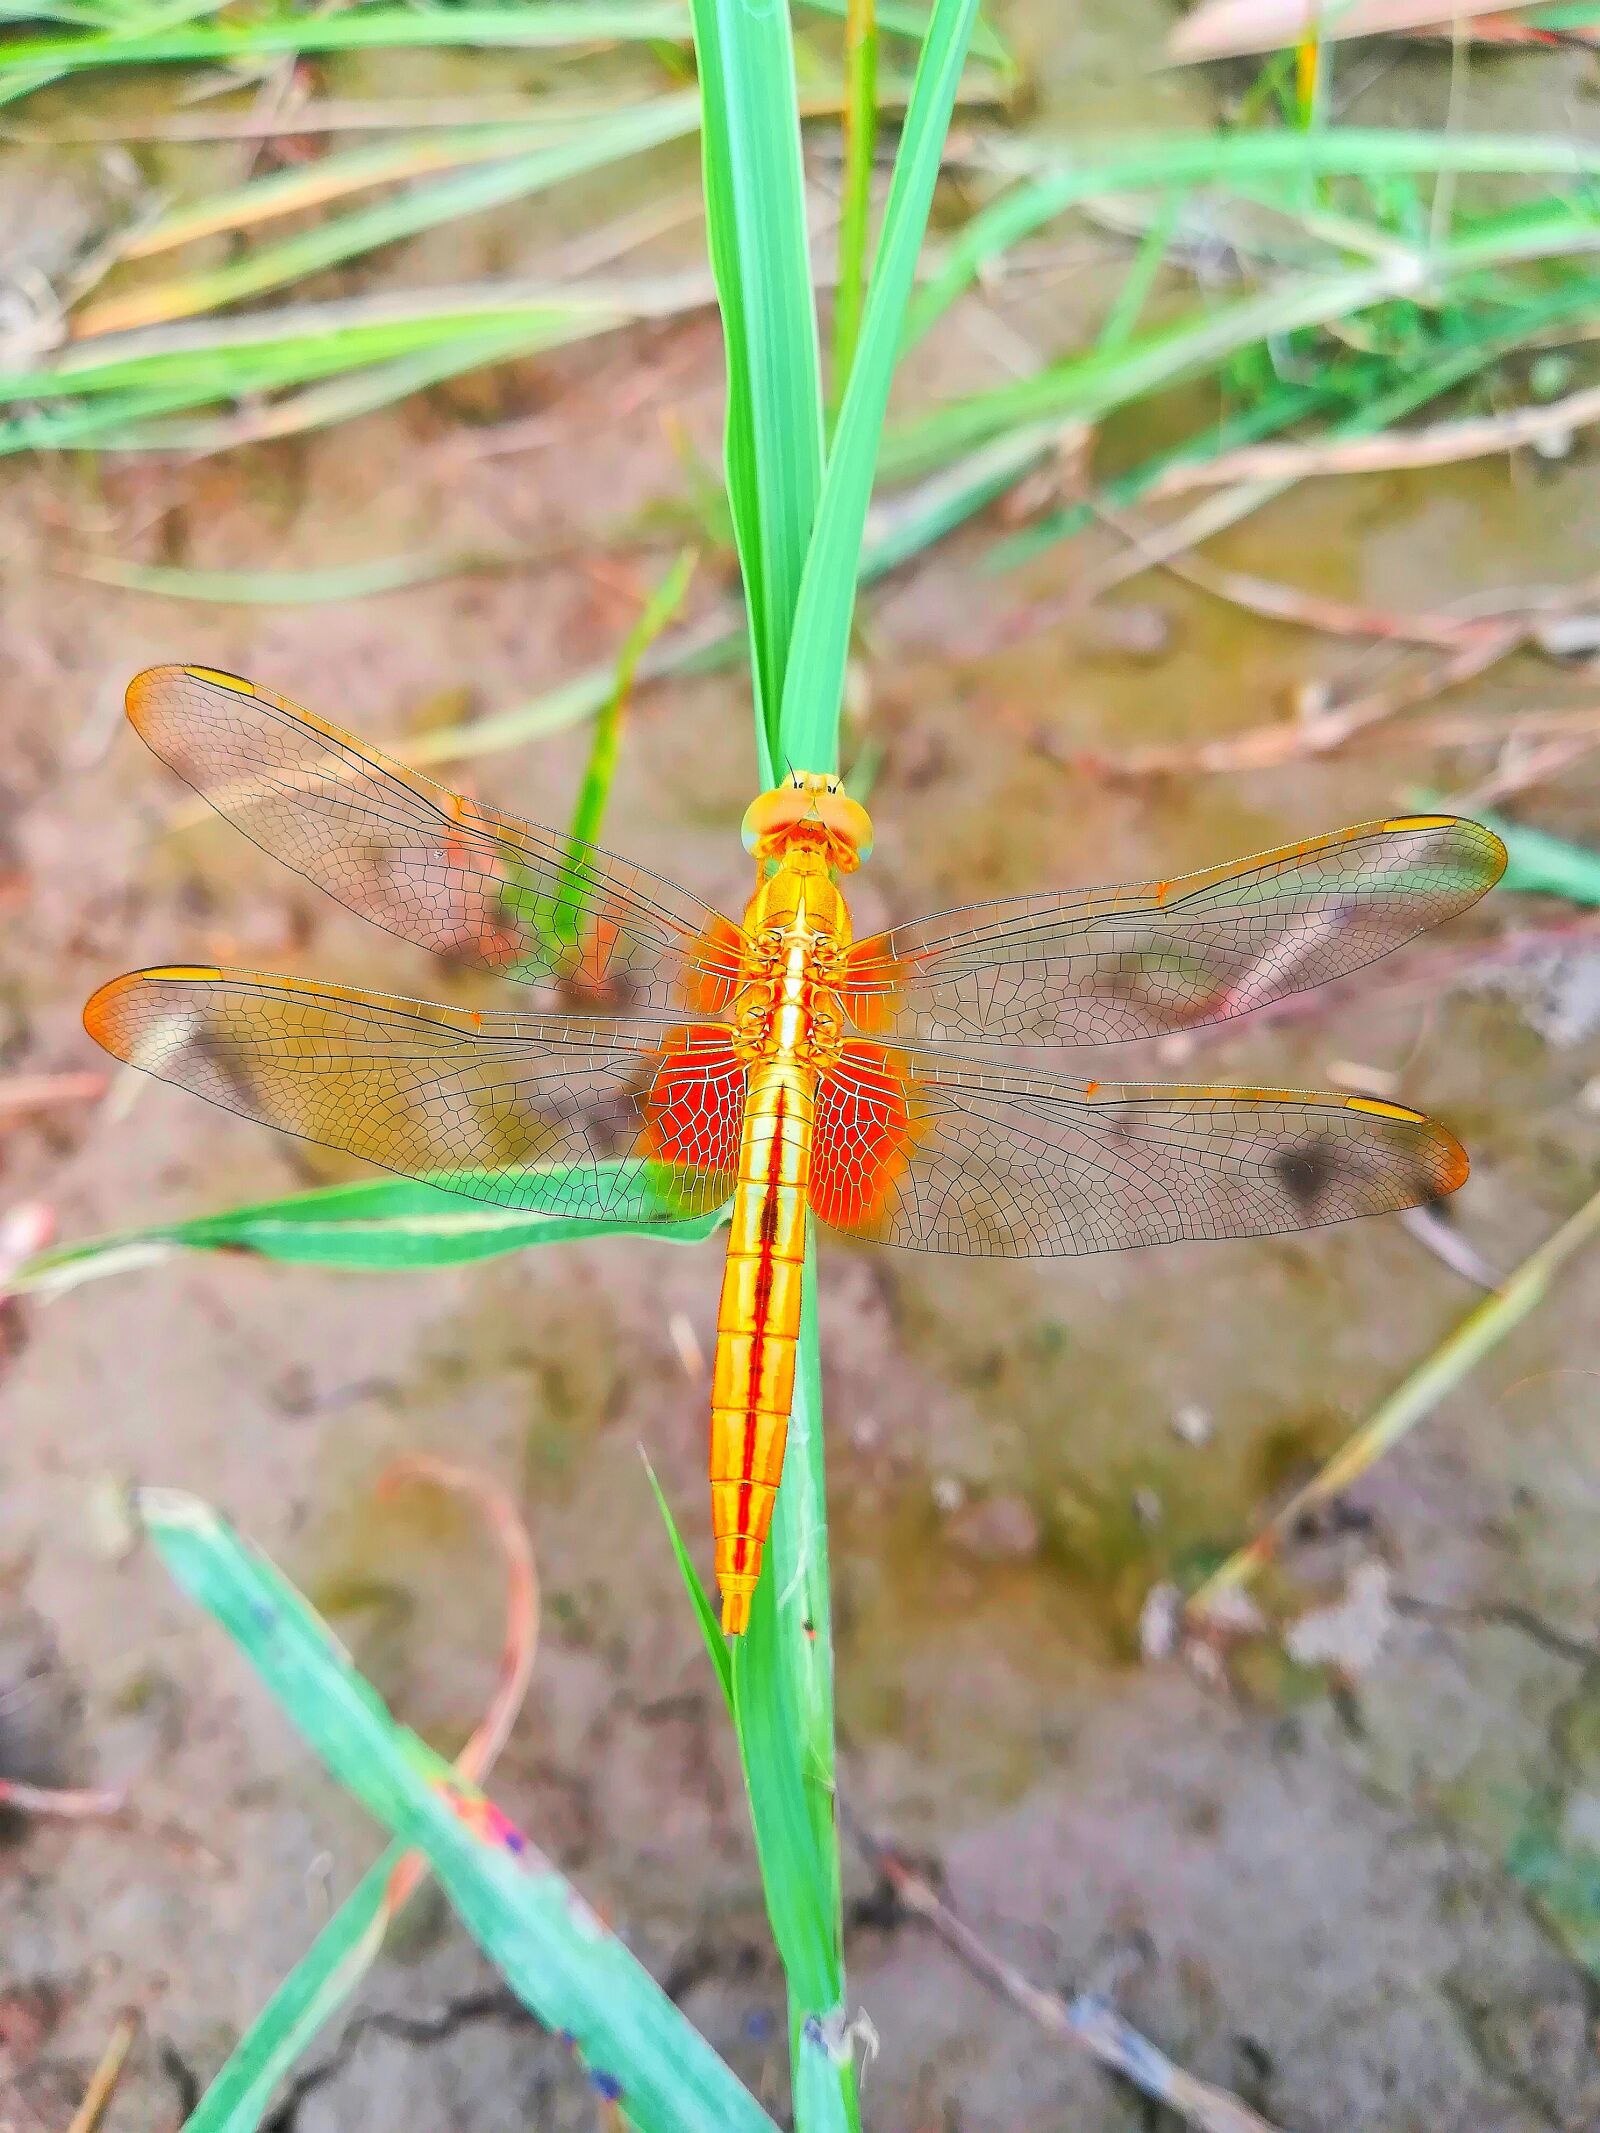 HUAWEI P10 lite sample photo. Dragonfly, yellow, nature photography